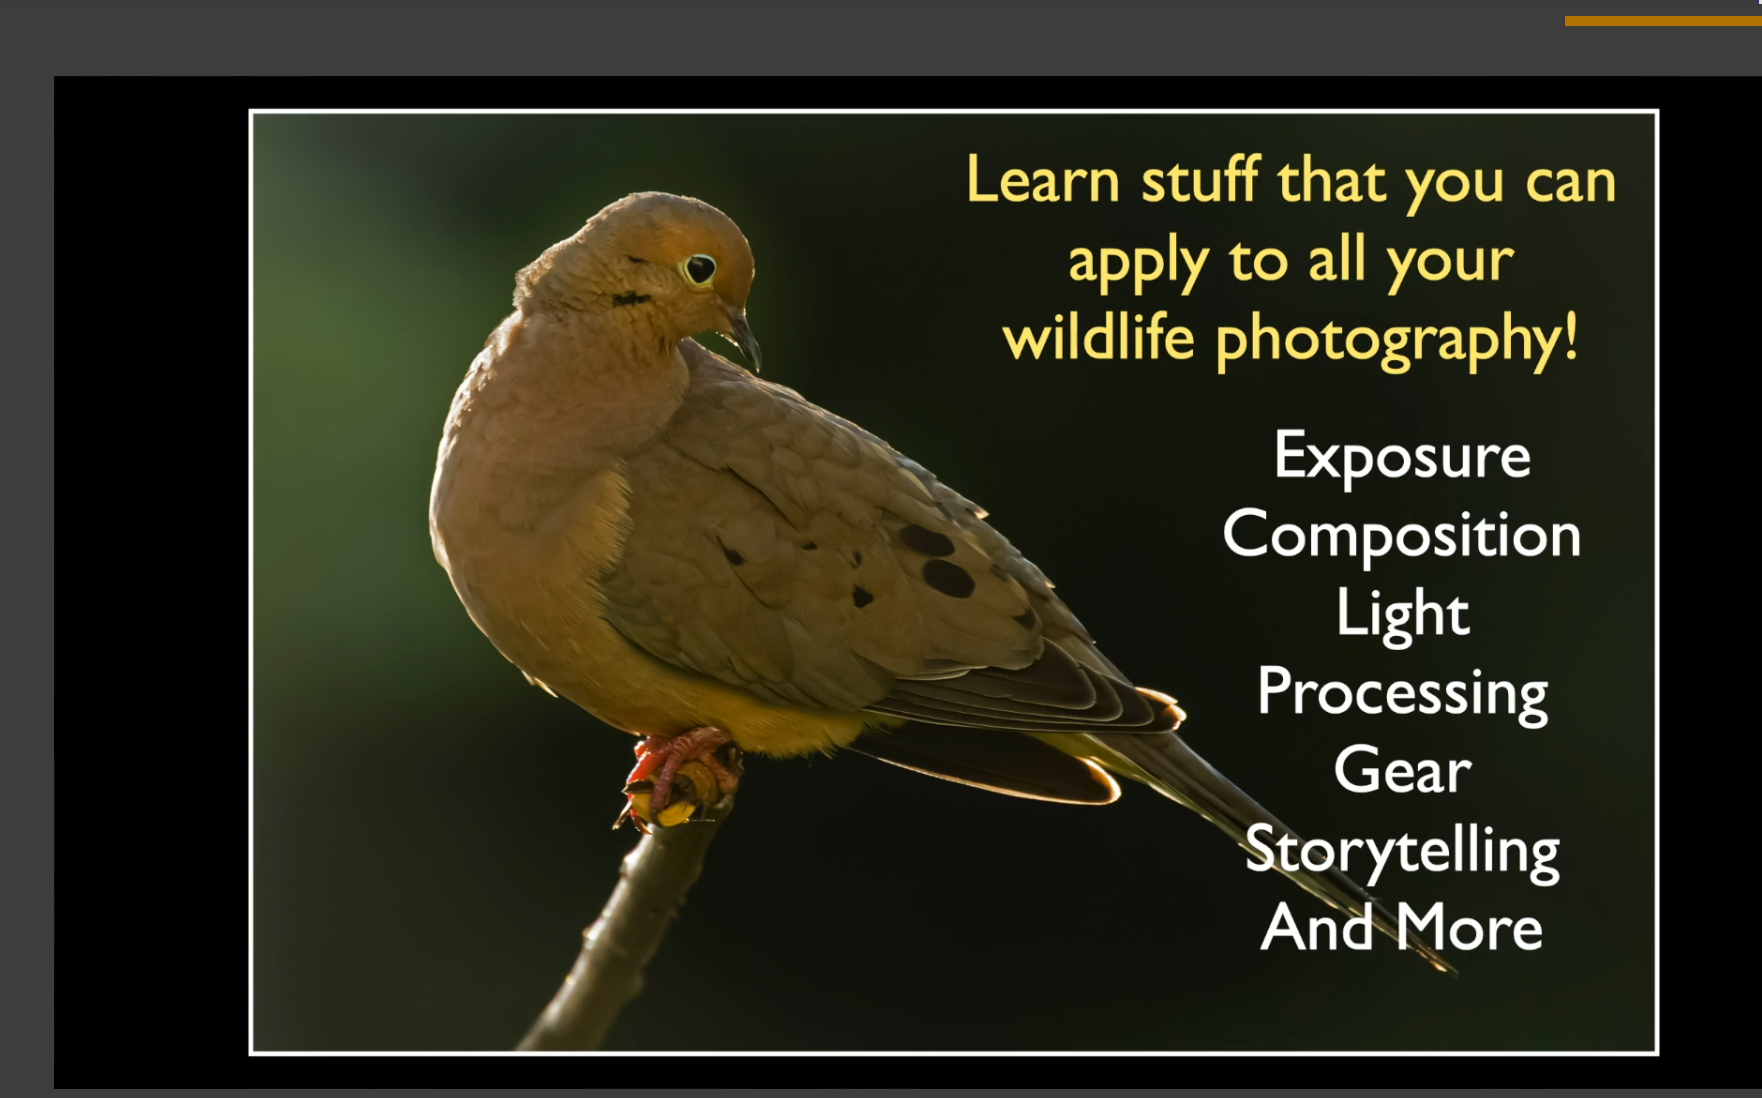 an example of the information Rick Sammon hares in his KelbyOne course.